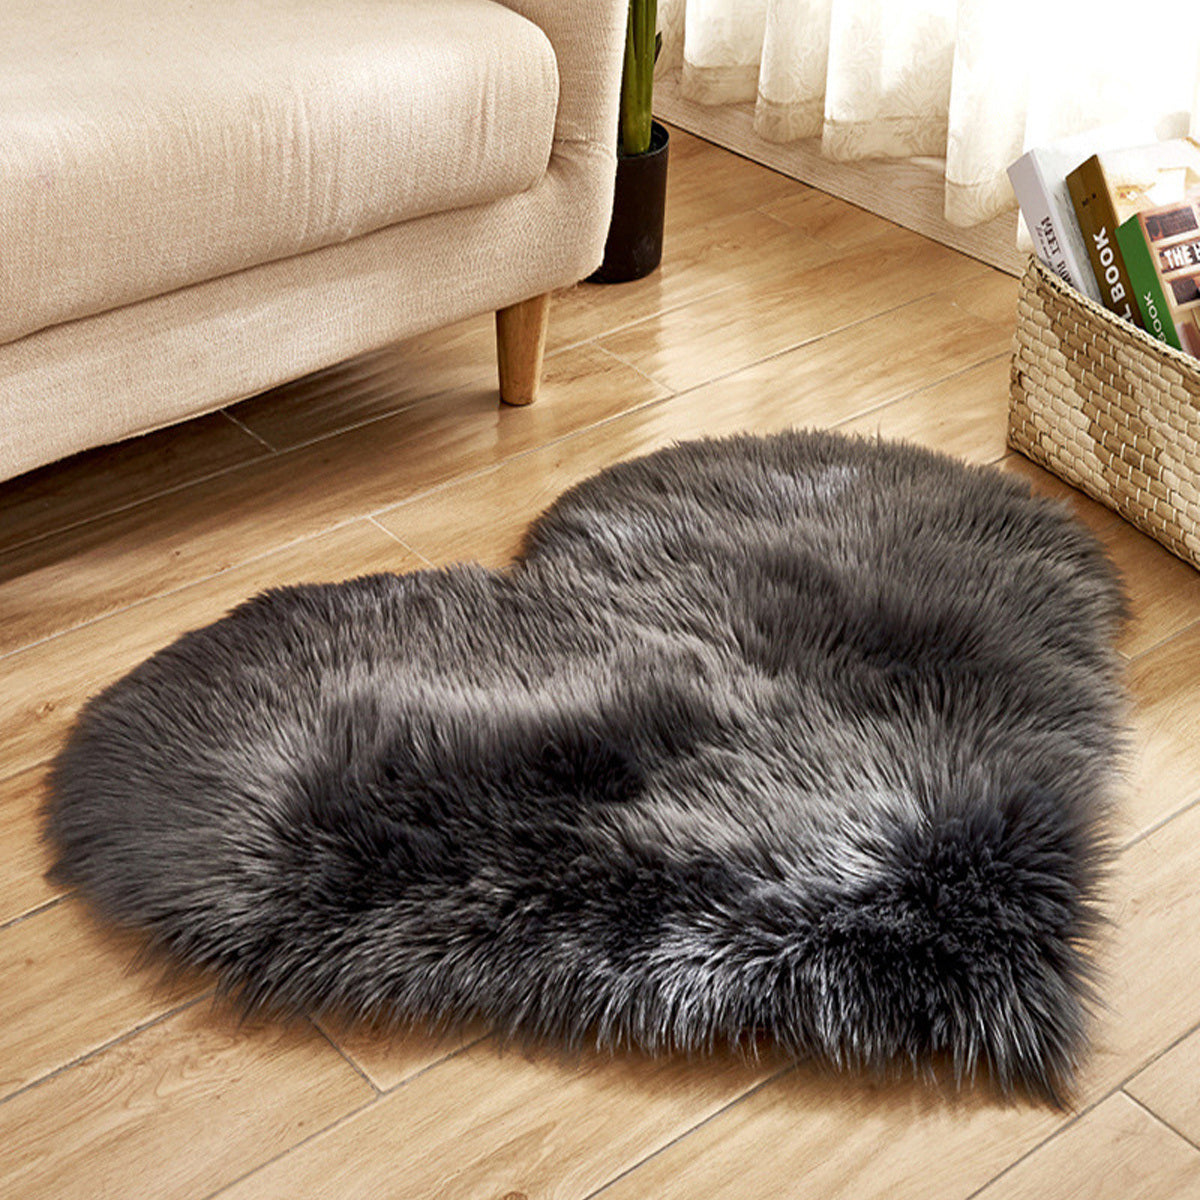 1pc Heart Shaped Area Rug, Plush Faux-Fur Carpet For Living Room & Bedroom, Home Decor Valentine's Day Decor 19.6in*23.6in/50cm*60cm